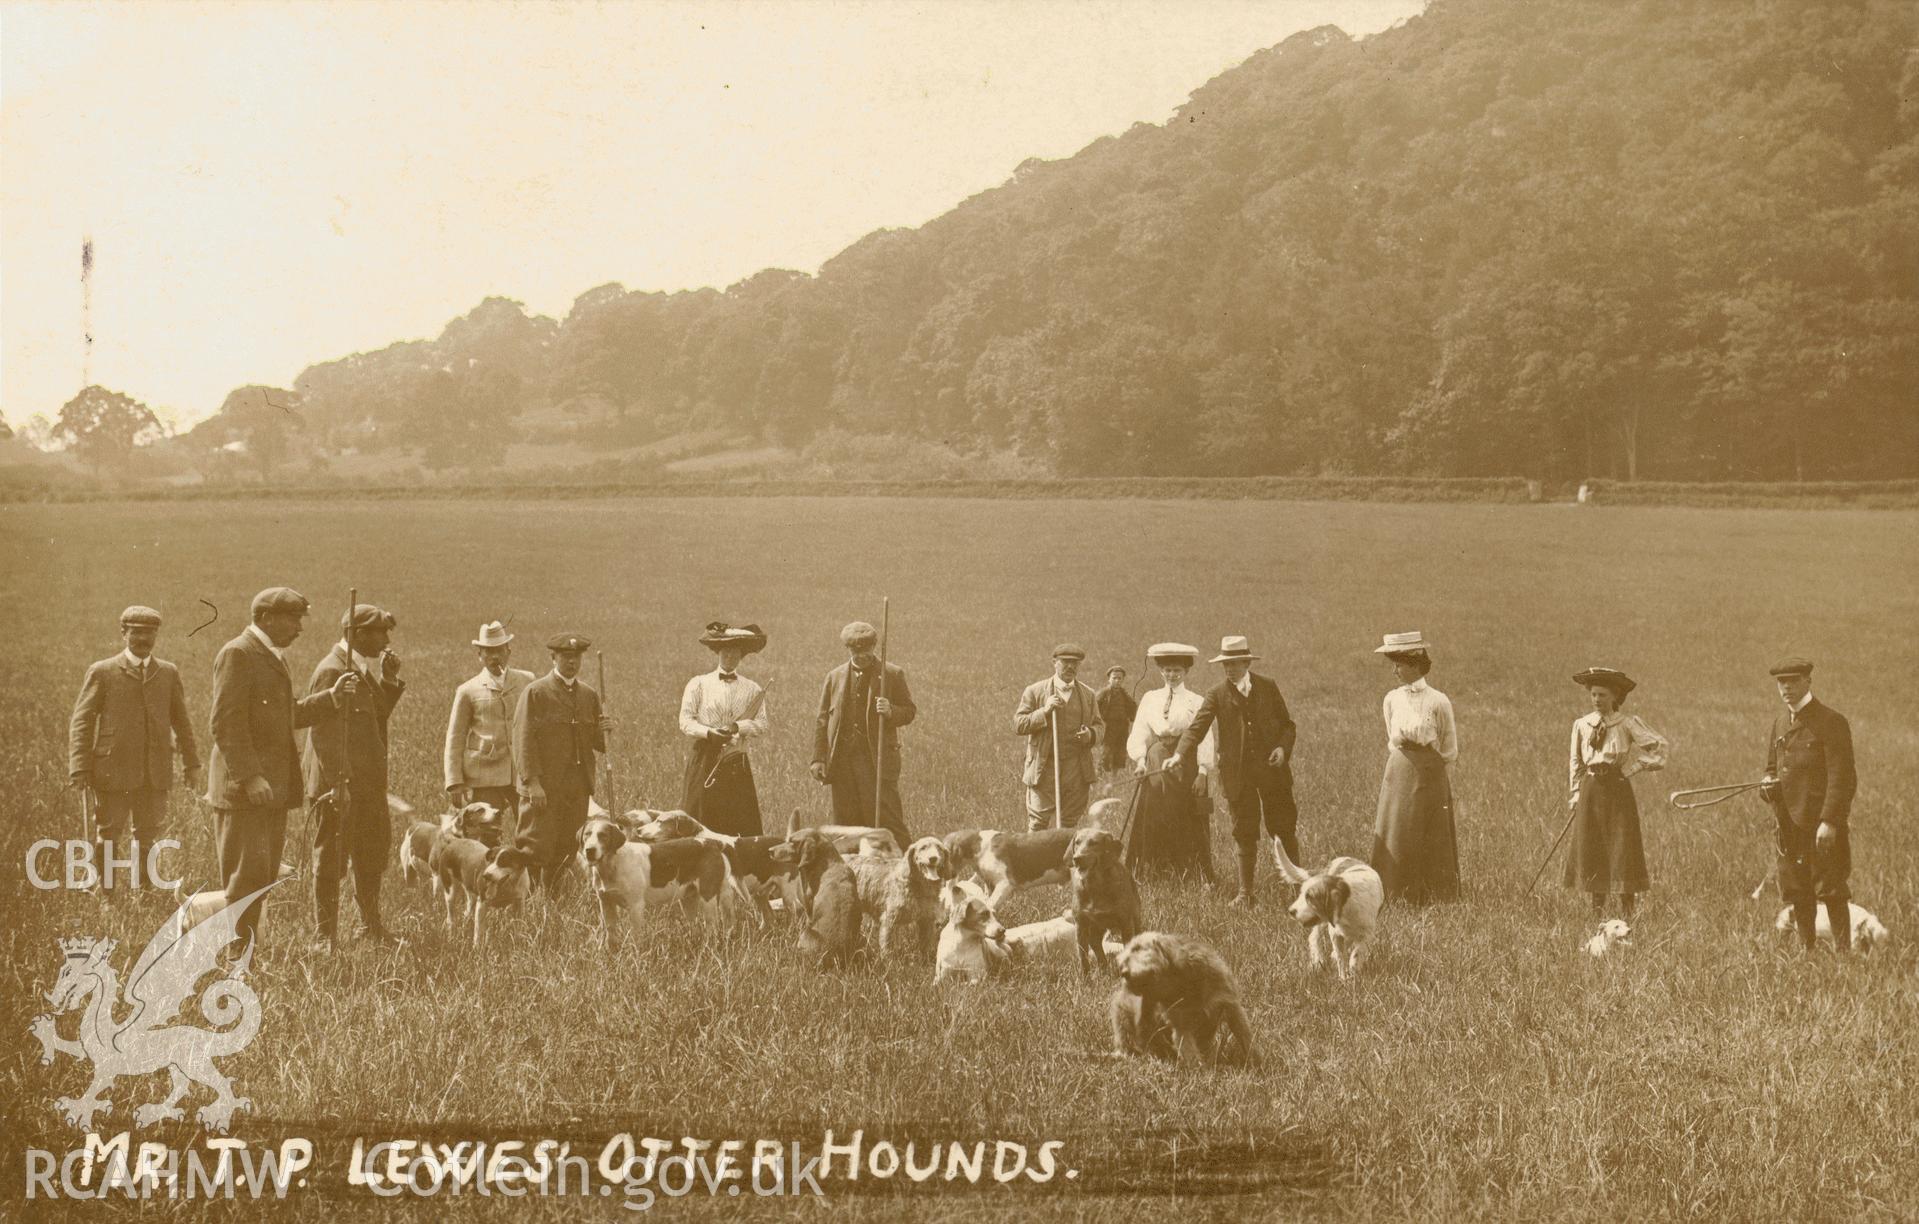 Digitised postcard image of otter hounds at Llanerchaeron. Produced by Parks and Gardens Data Services, from an original item in the Peter Davis Collection at Parks and Gardens UK. We hold only web-resolution images of this collection, suitable for viewing on screen and for research purposes only. We do not hold the original images, or publication quality scans.